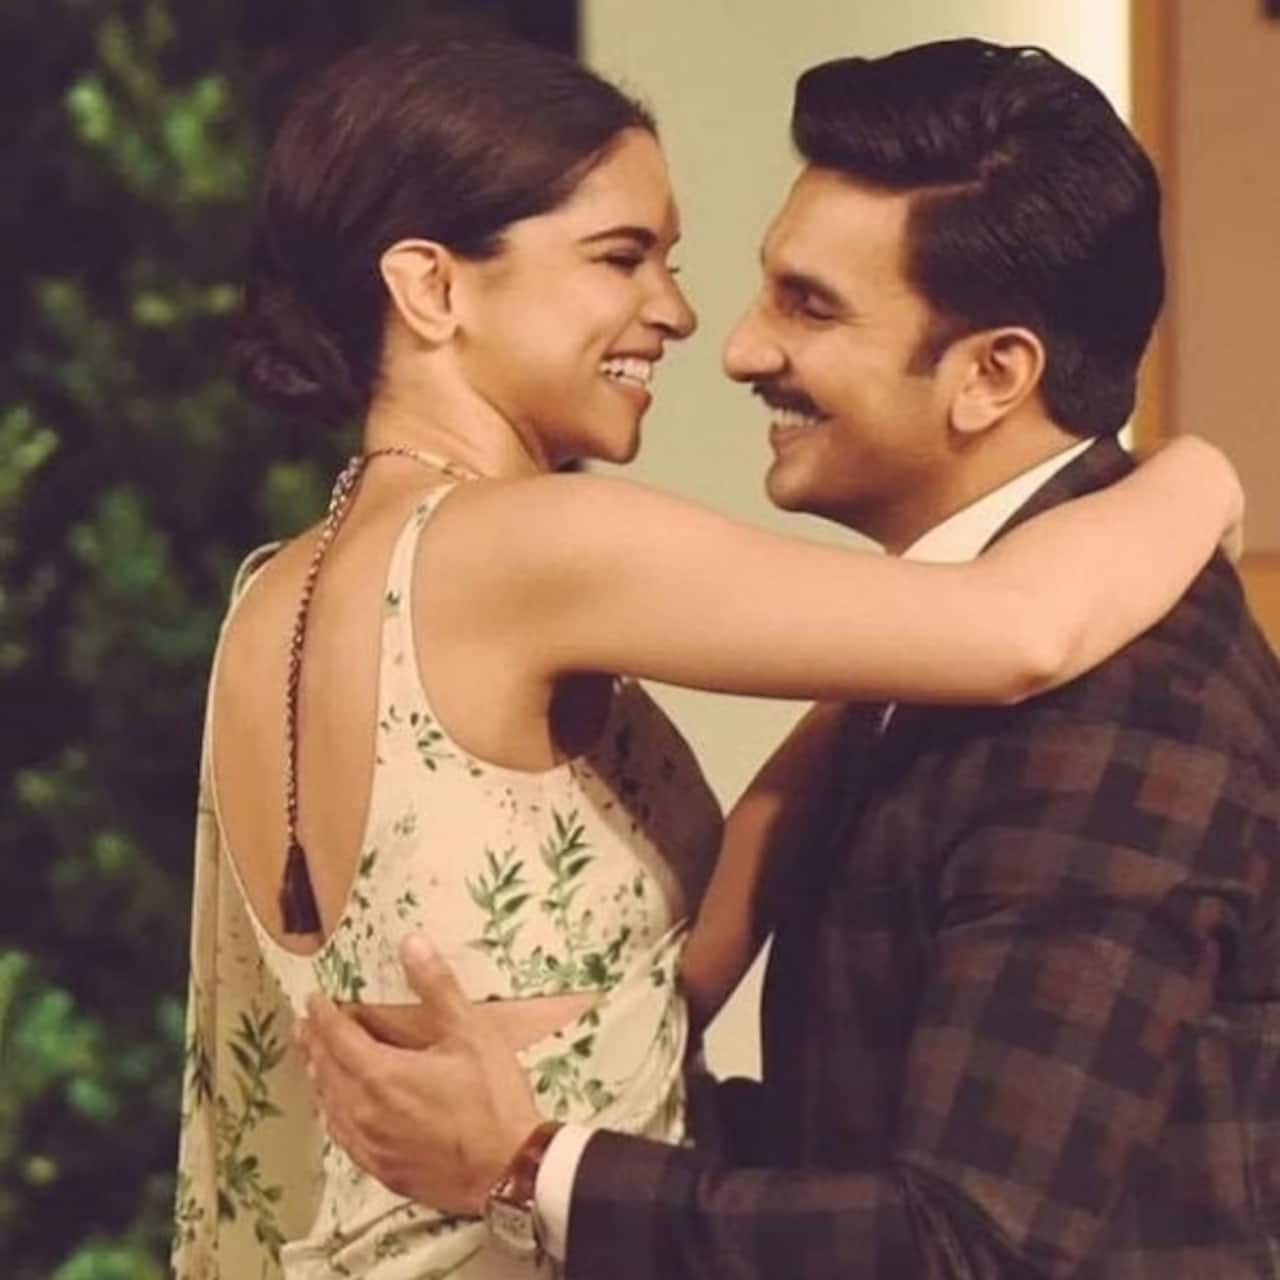 Ranveer Singh opens up about his bond with Deepika Padukone amid rumours of trouble in their relationship